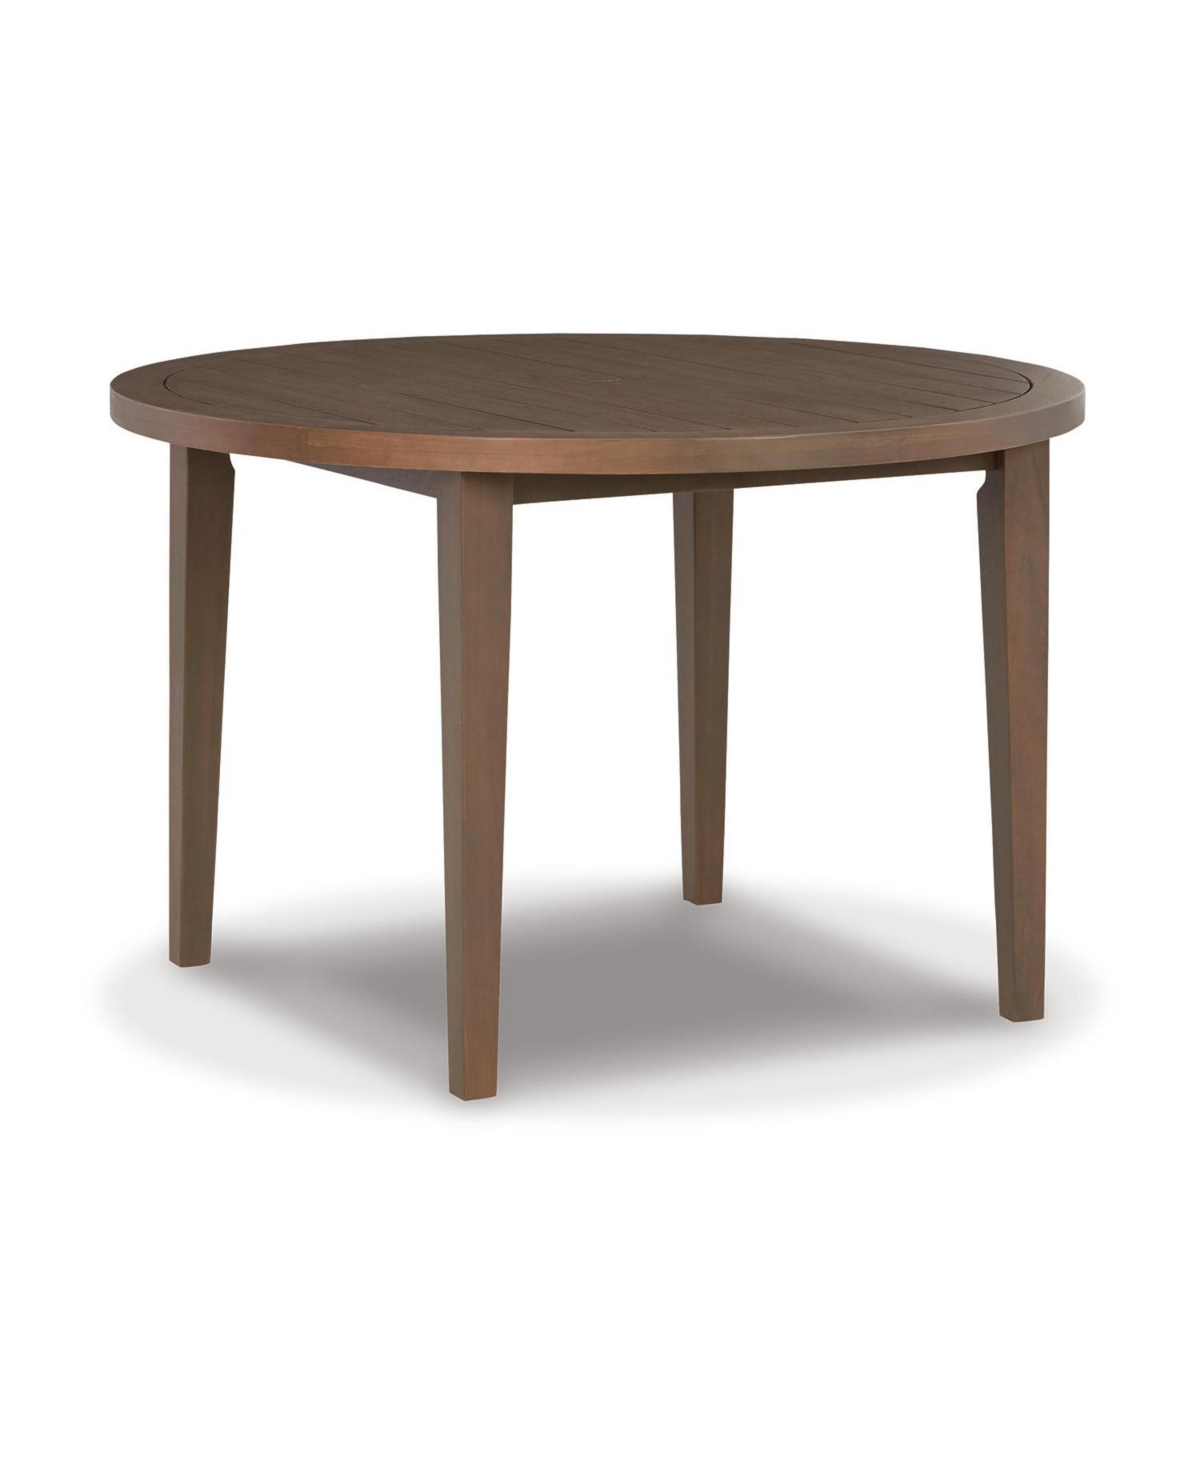 Signature Design By Ashley Germalia Round Dining Table W/umb Opt In Brown